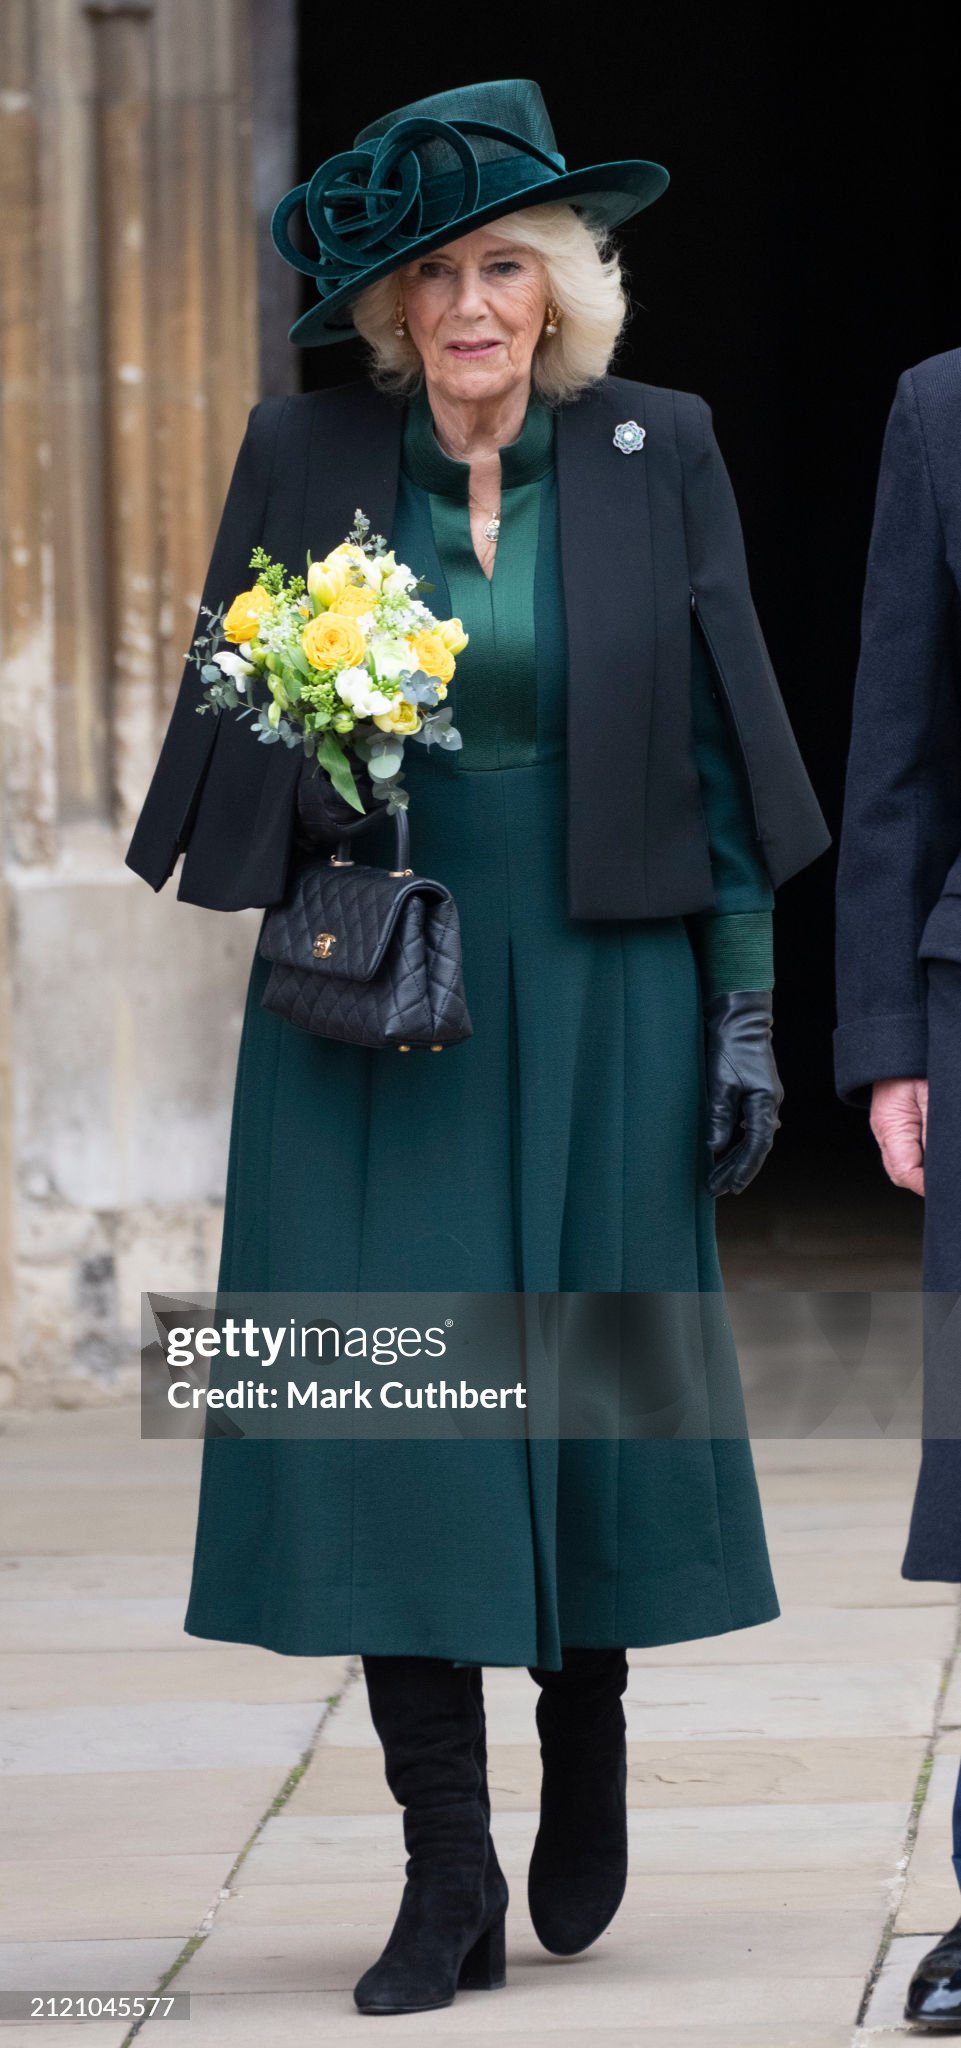 the-royal-family-attend-the-2024-easter-mattins-service.jpg?s=2048x2048&w=gi&k=20&c=vCe5mdTVprdnj4dEn6m8XTN_l6XLunmjTPmSfgjUJGU=